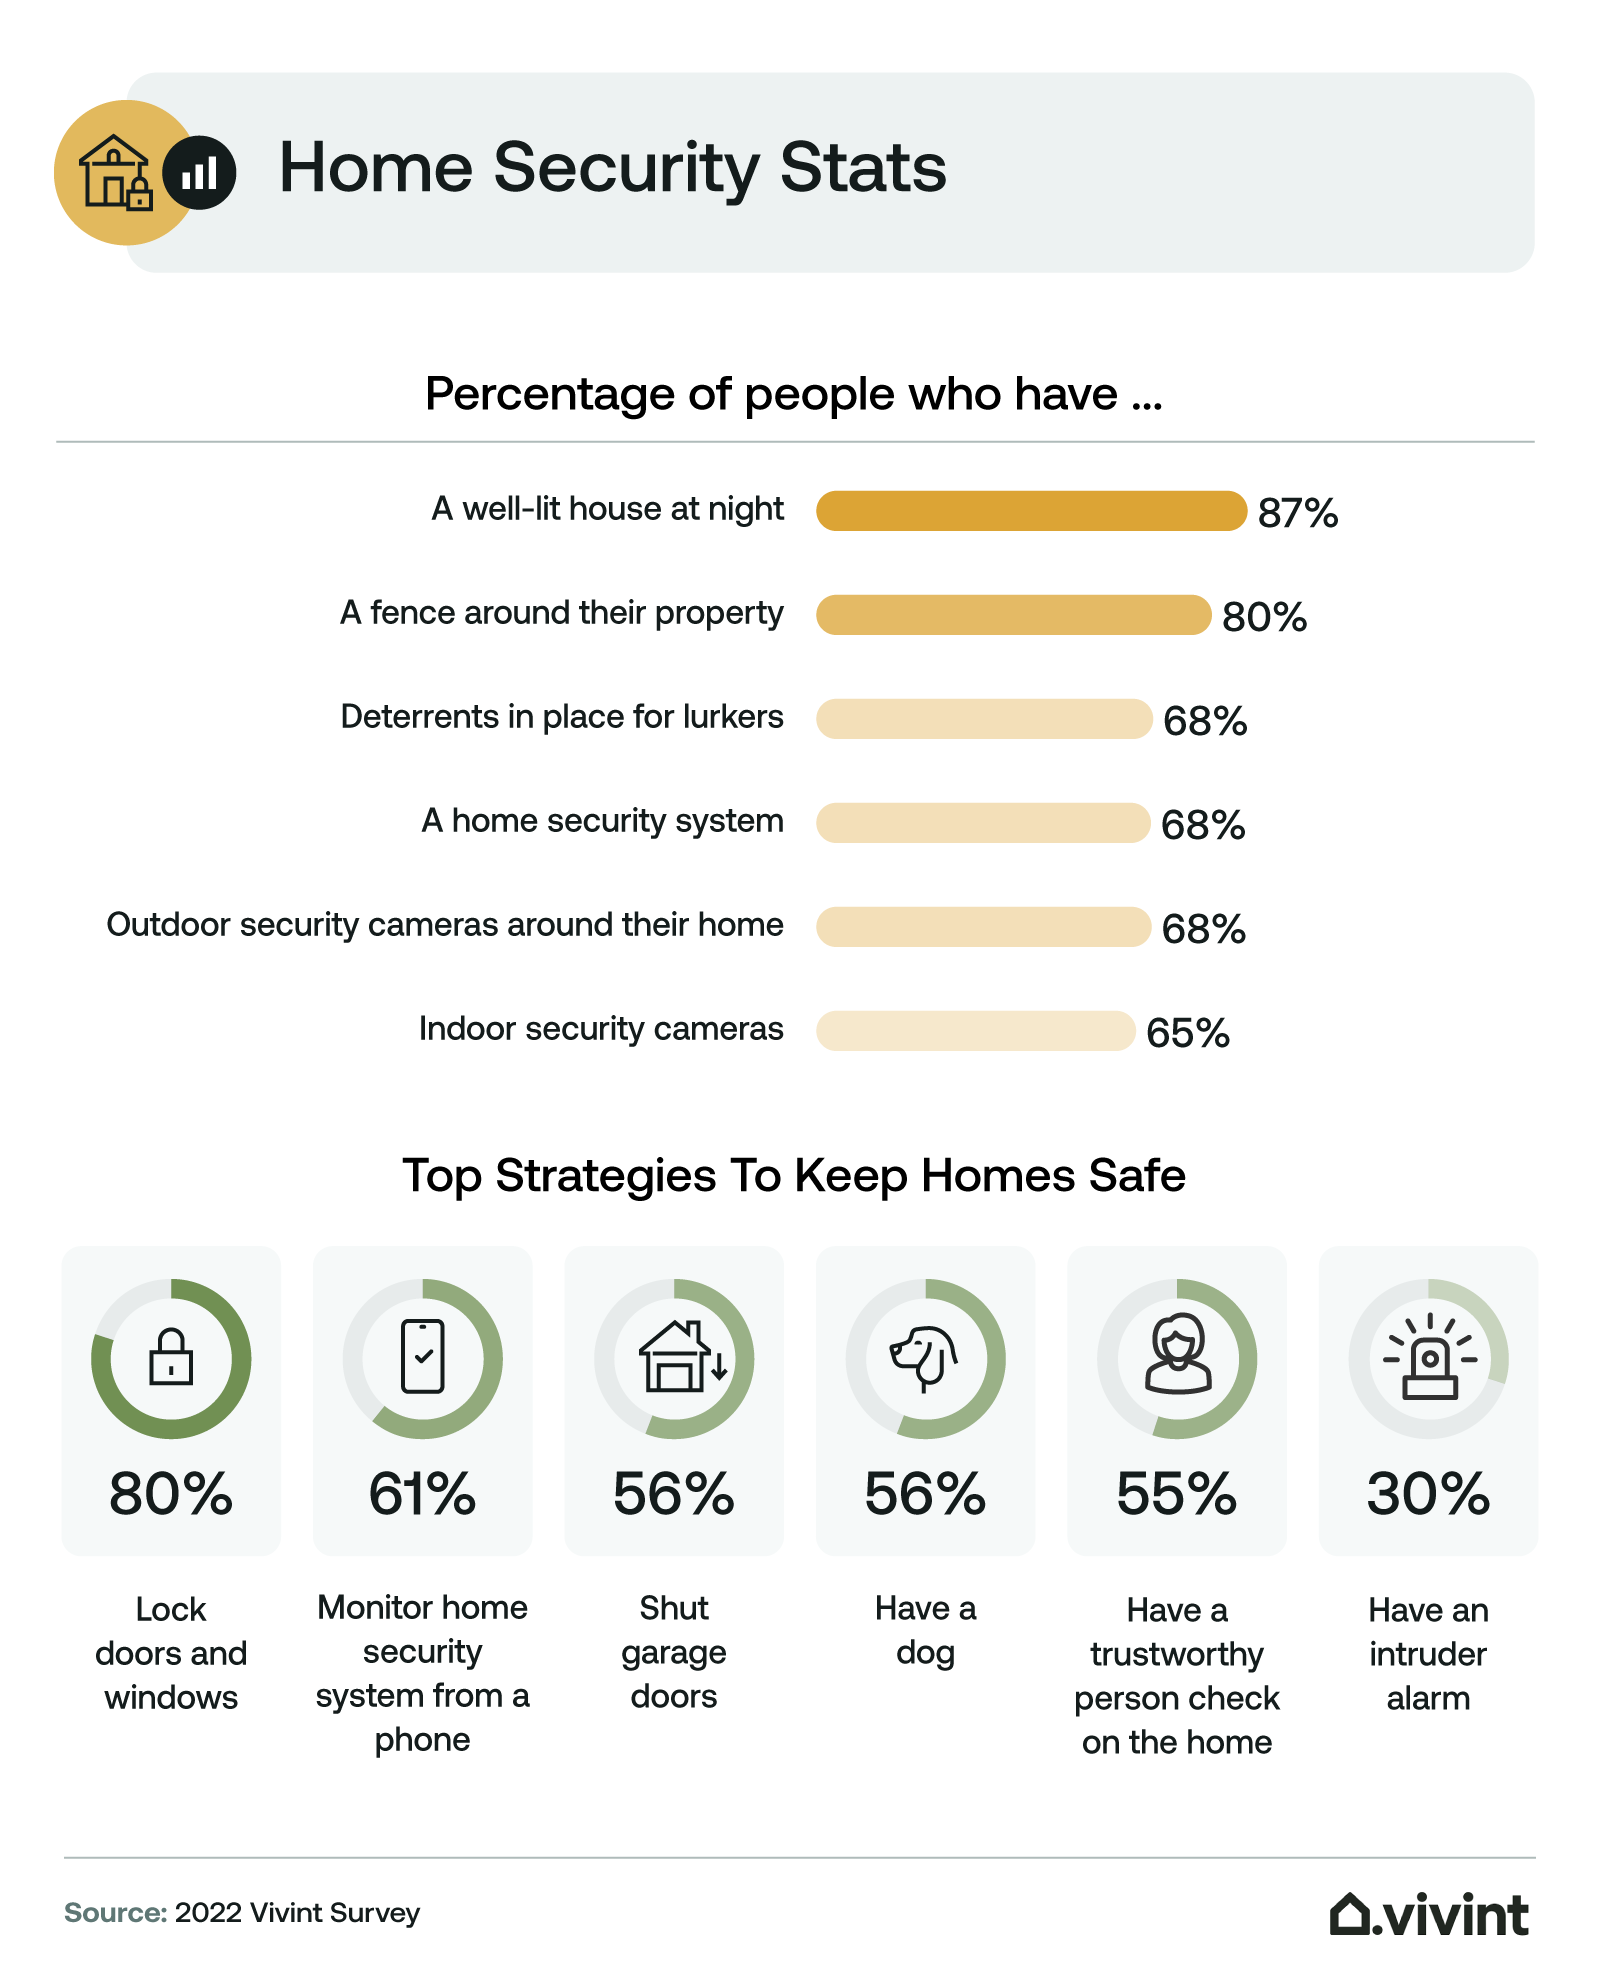 Information about how people keep their house safe through home security.